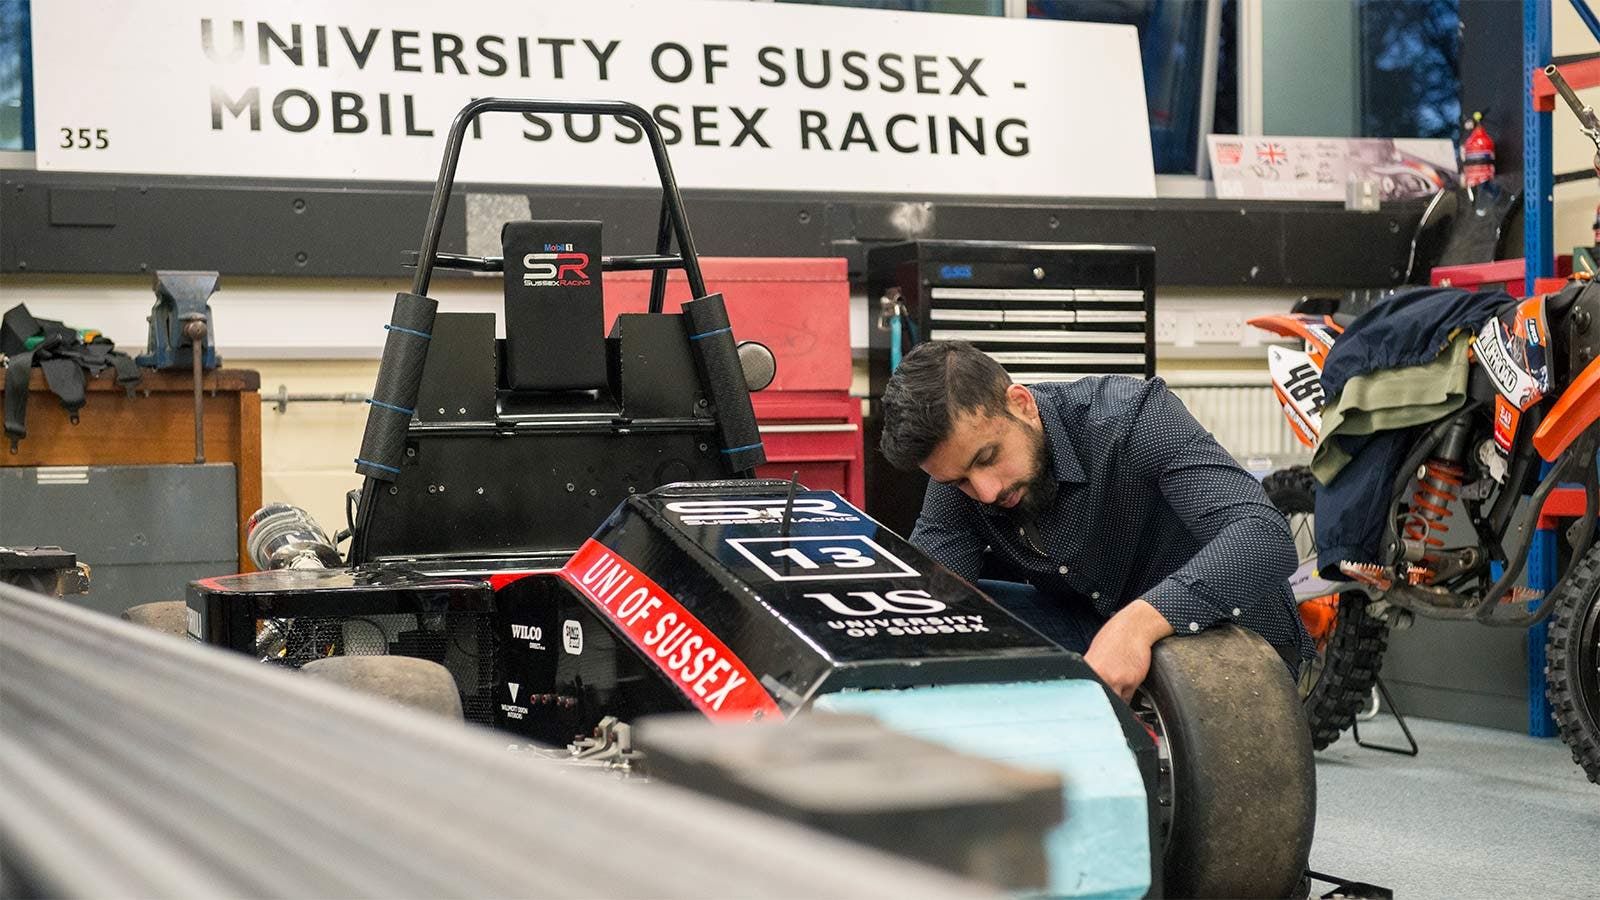 A University of Sussex student working on a race car